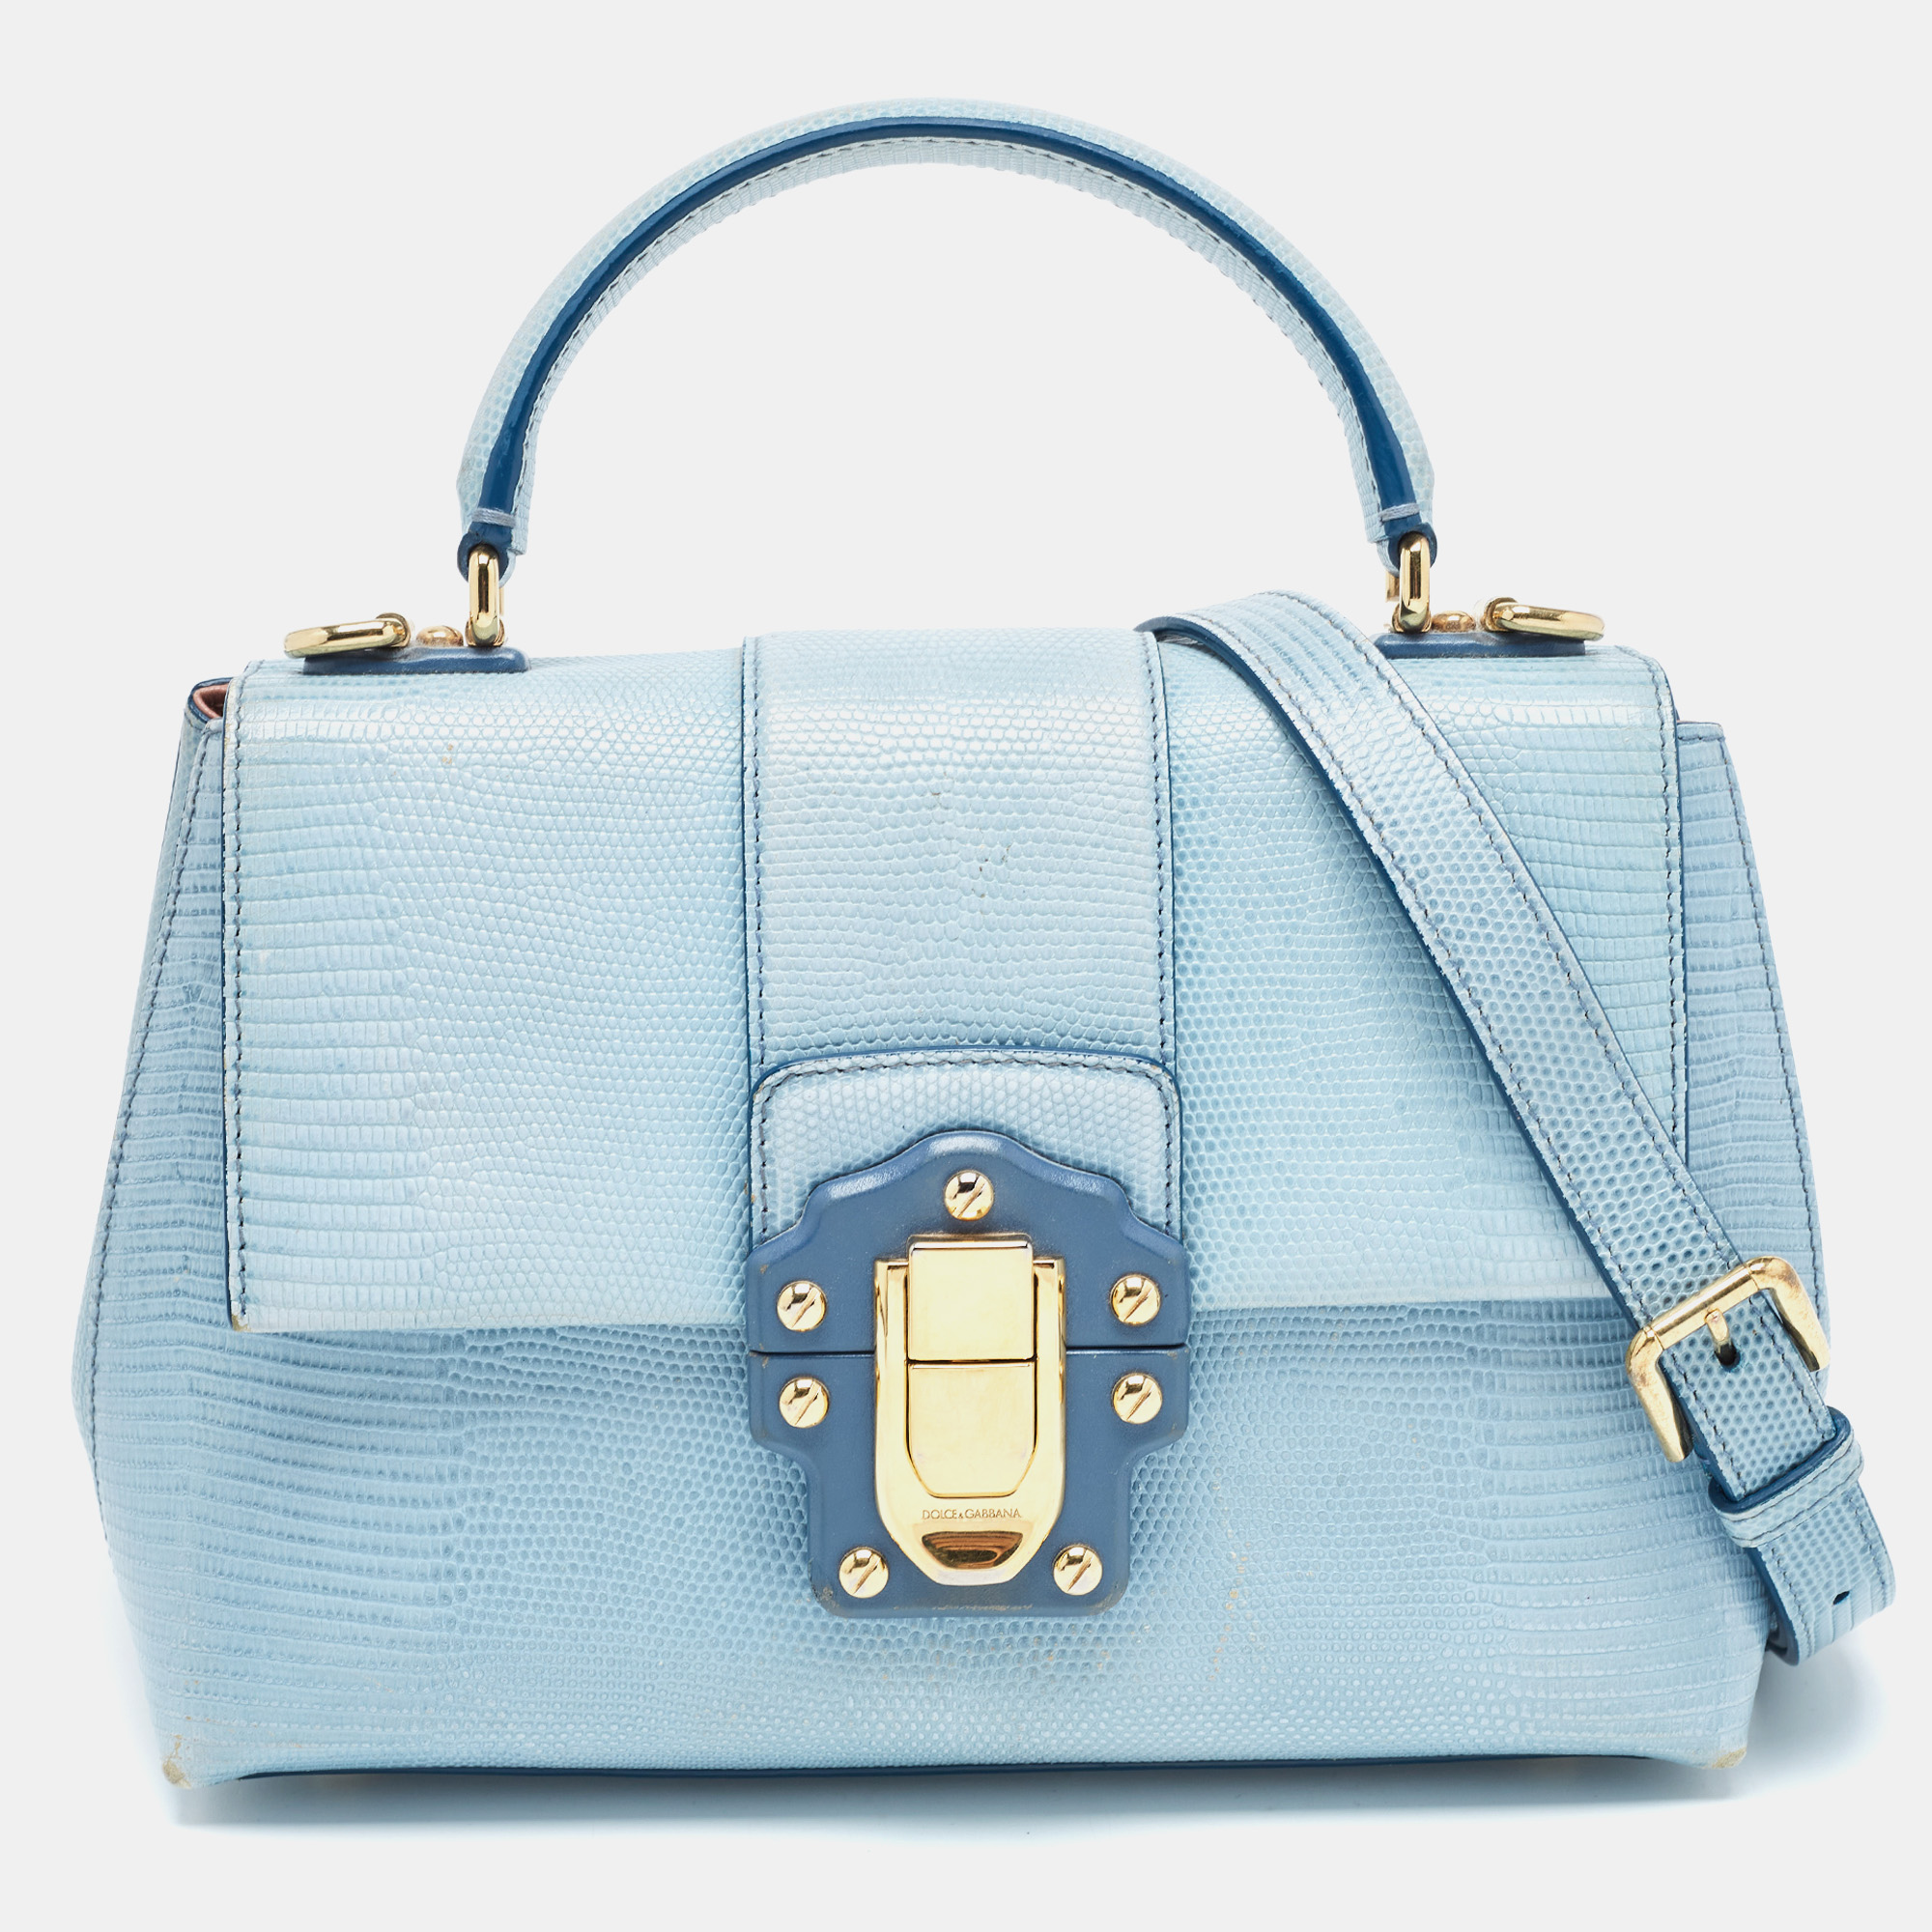 Dolce & Gabbana Blue Lizard Embossed Leather Small Lucia Top Handle Bag